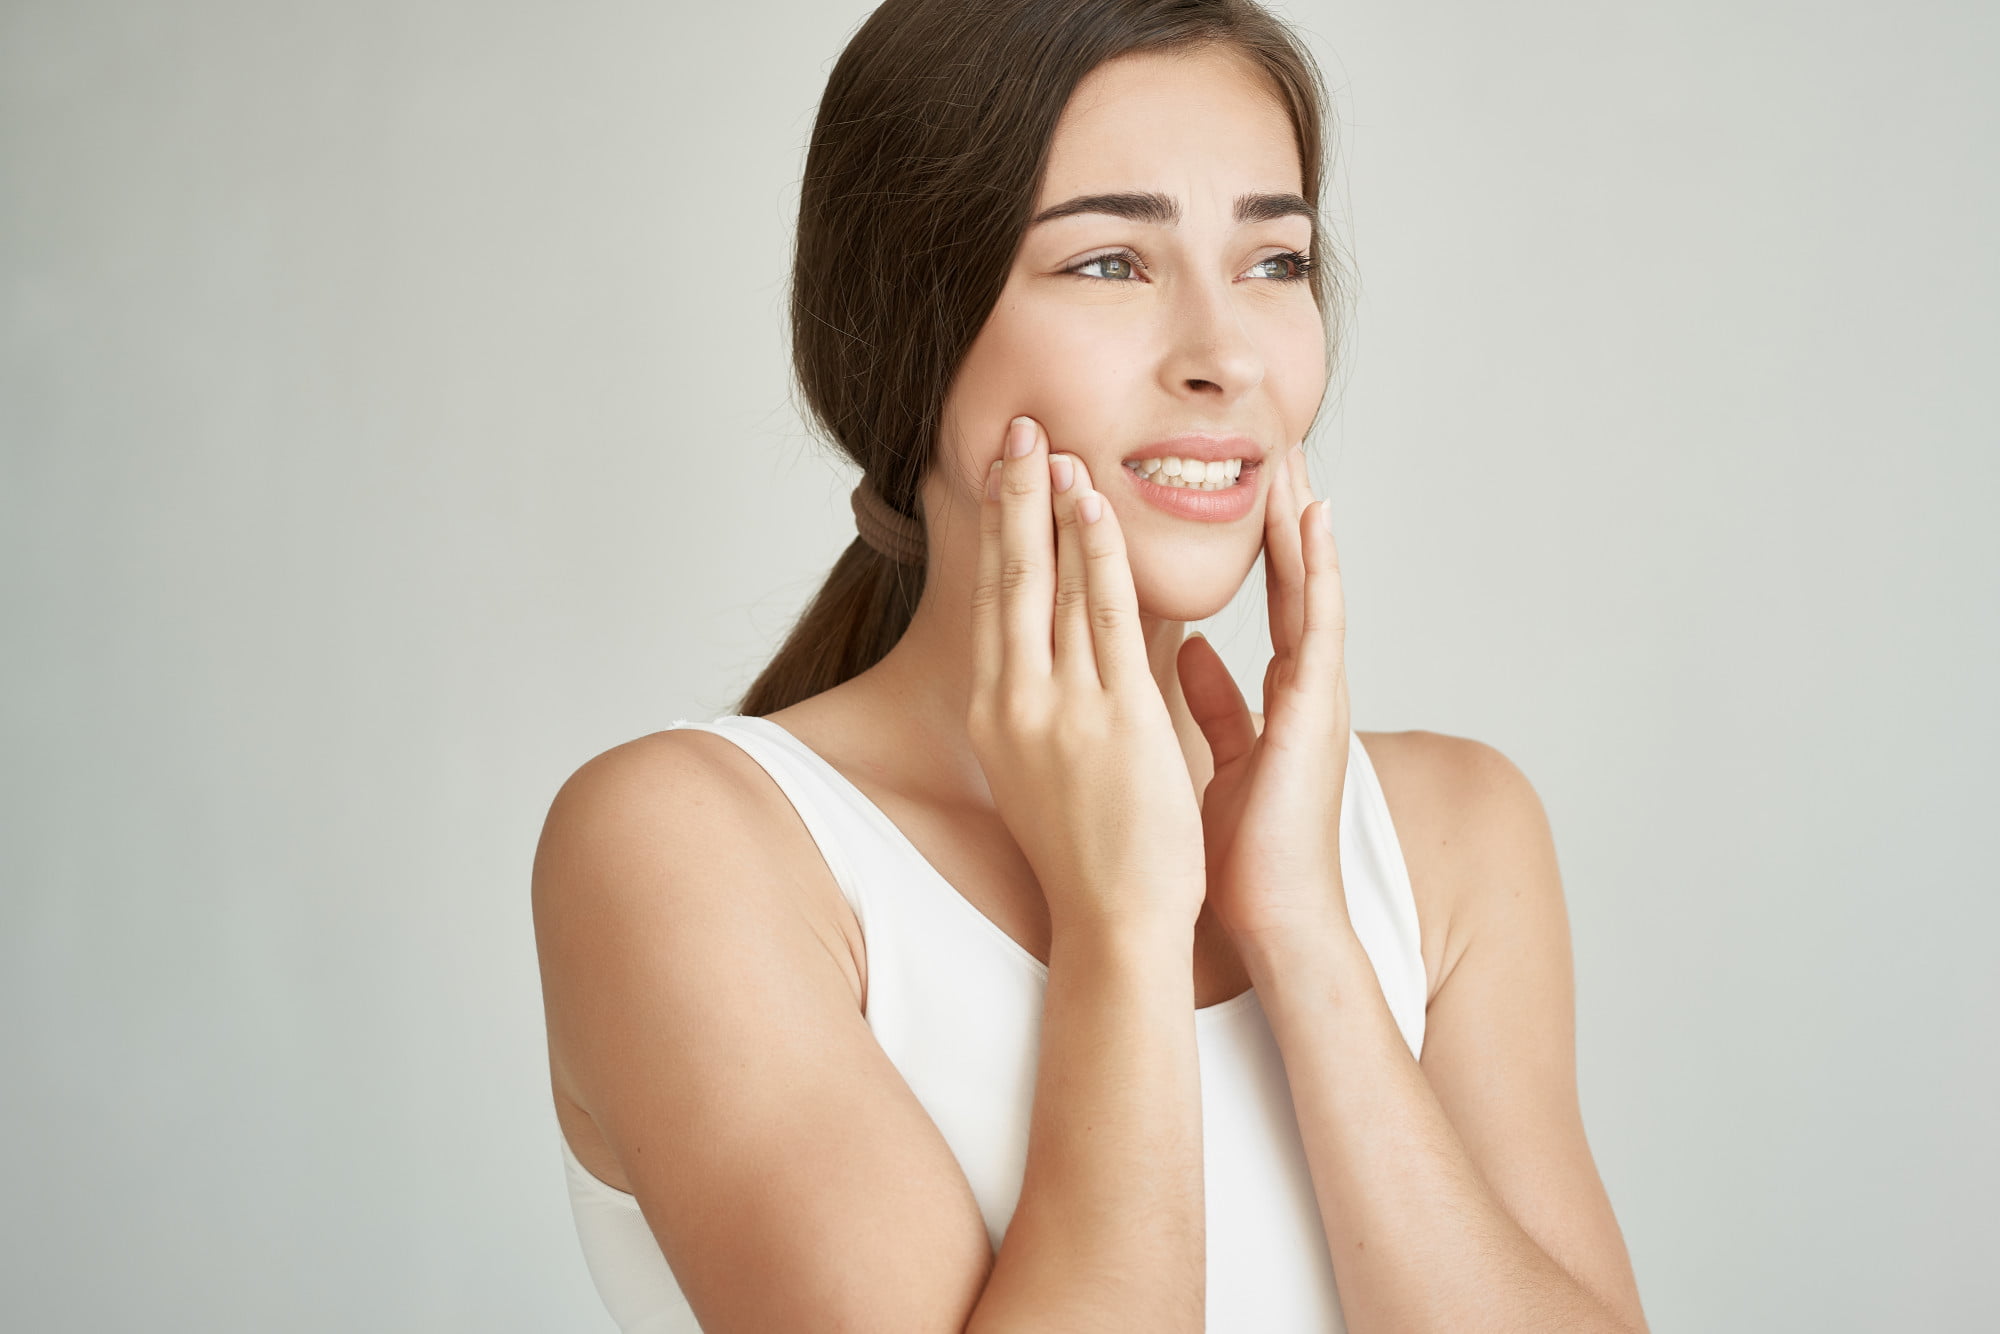 Are you wondering if your jaw clicking is a sign of TMJ? In this article we discuss if you have TMJ jaw clicking, so keep reading.